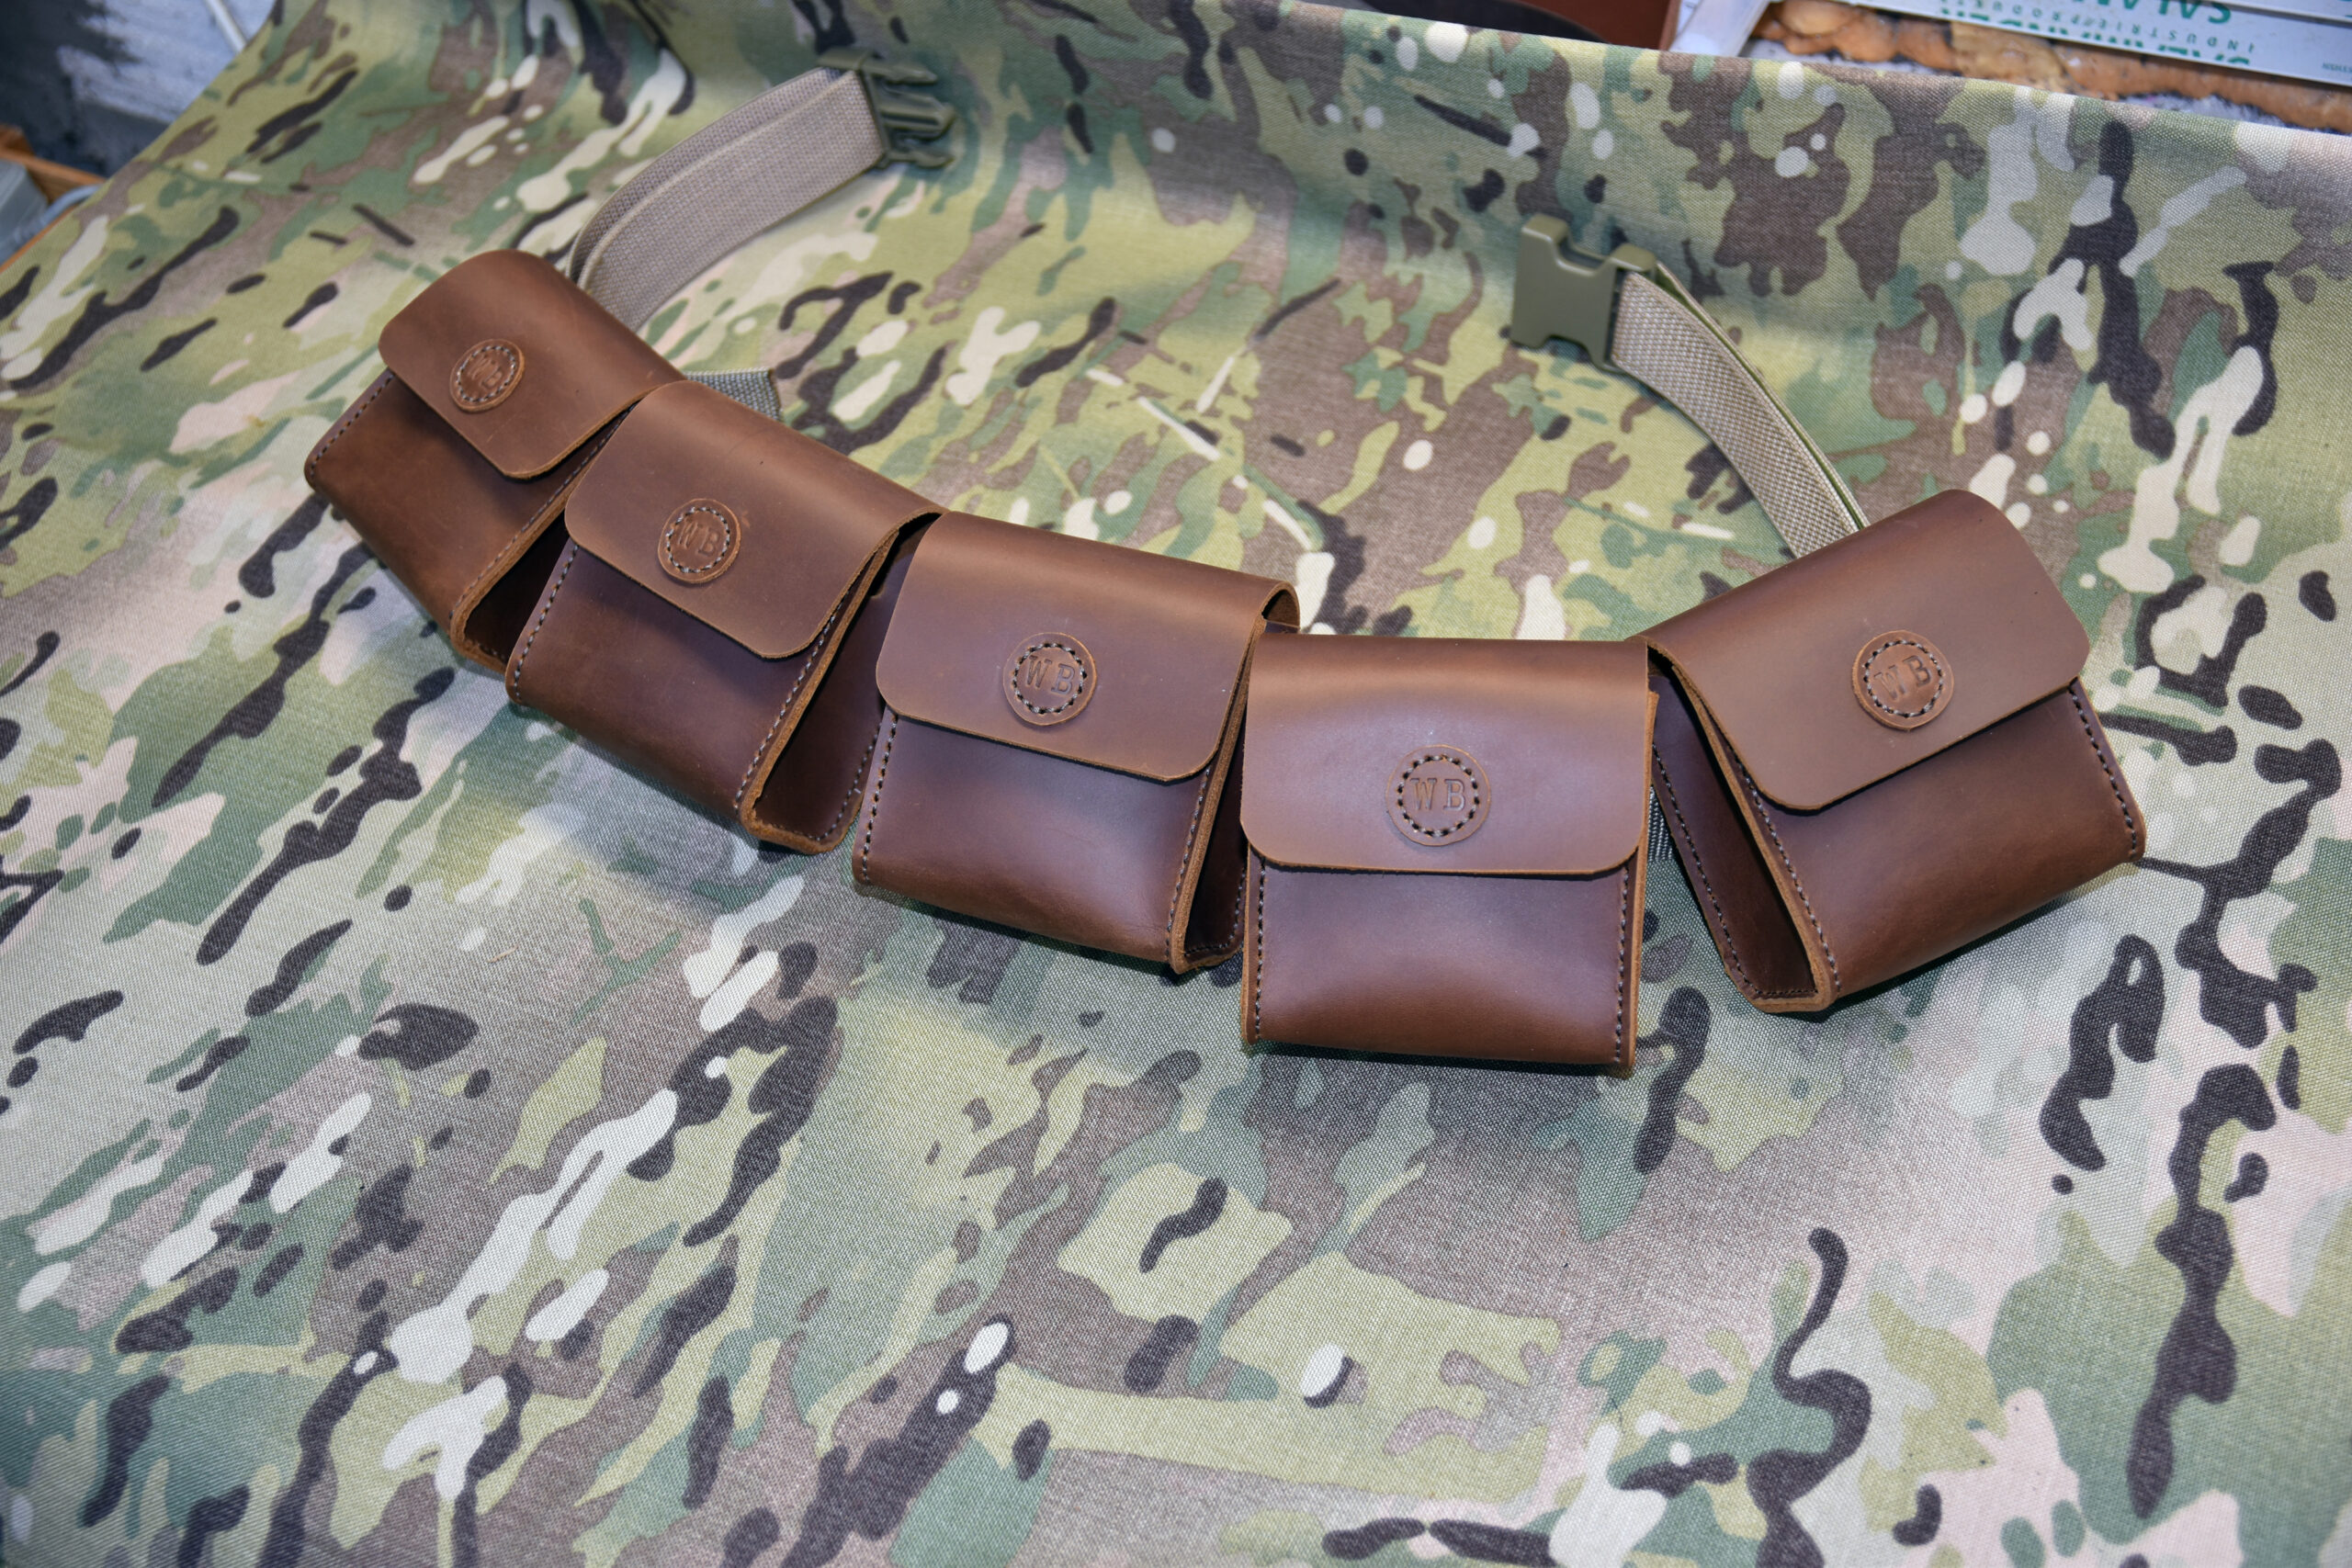 Multi-purpose Hunters pouch with belts loop - Wild Wild Dill